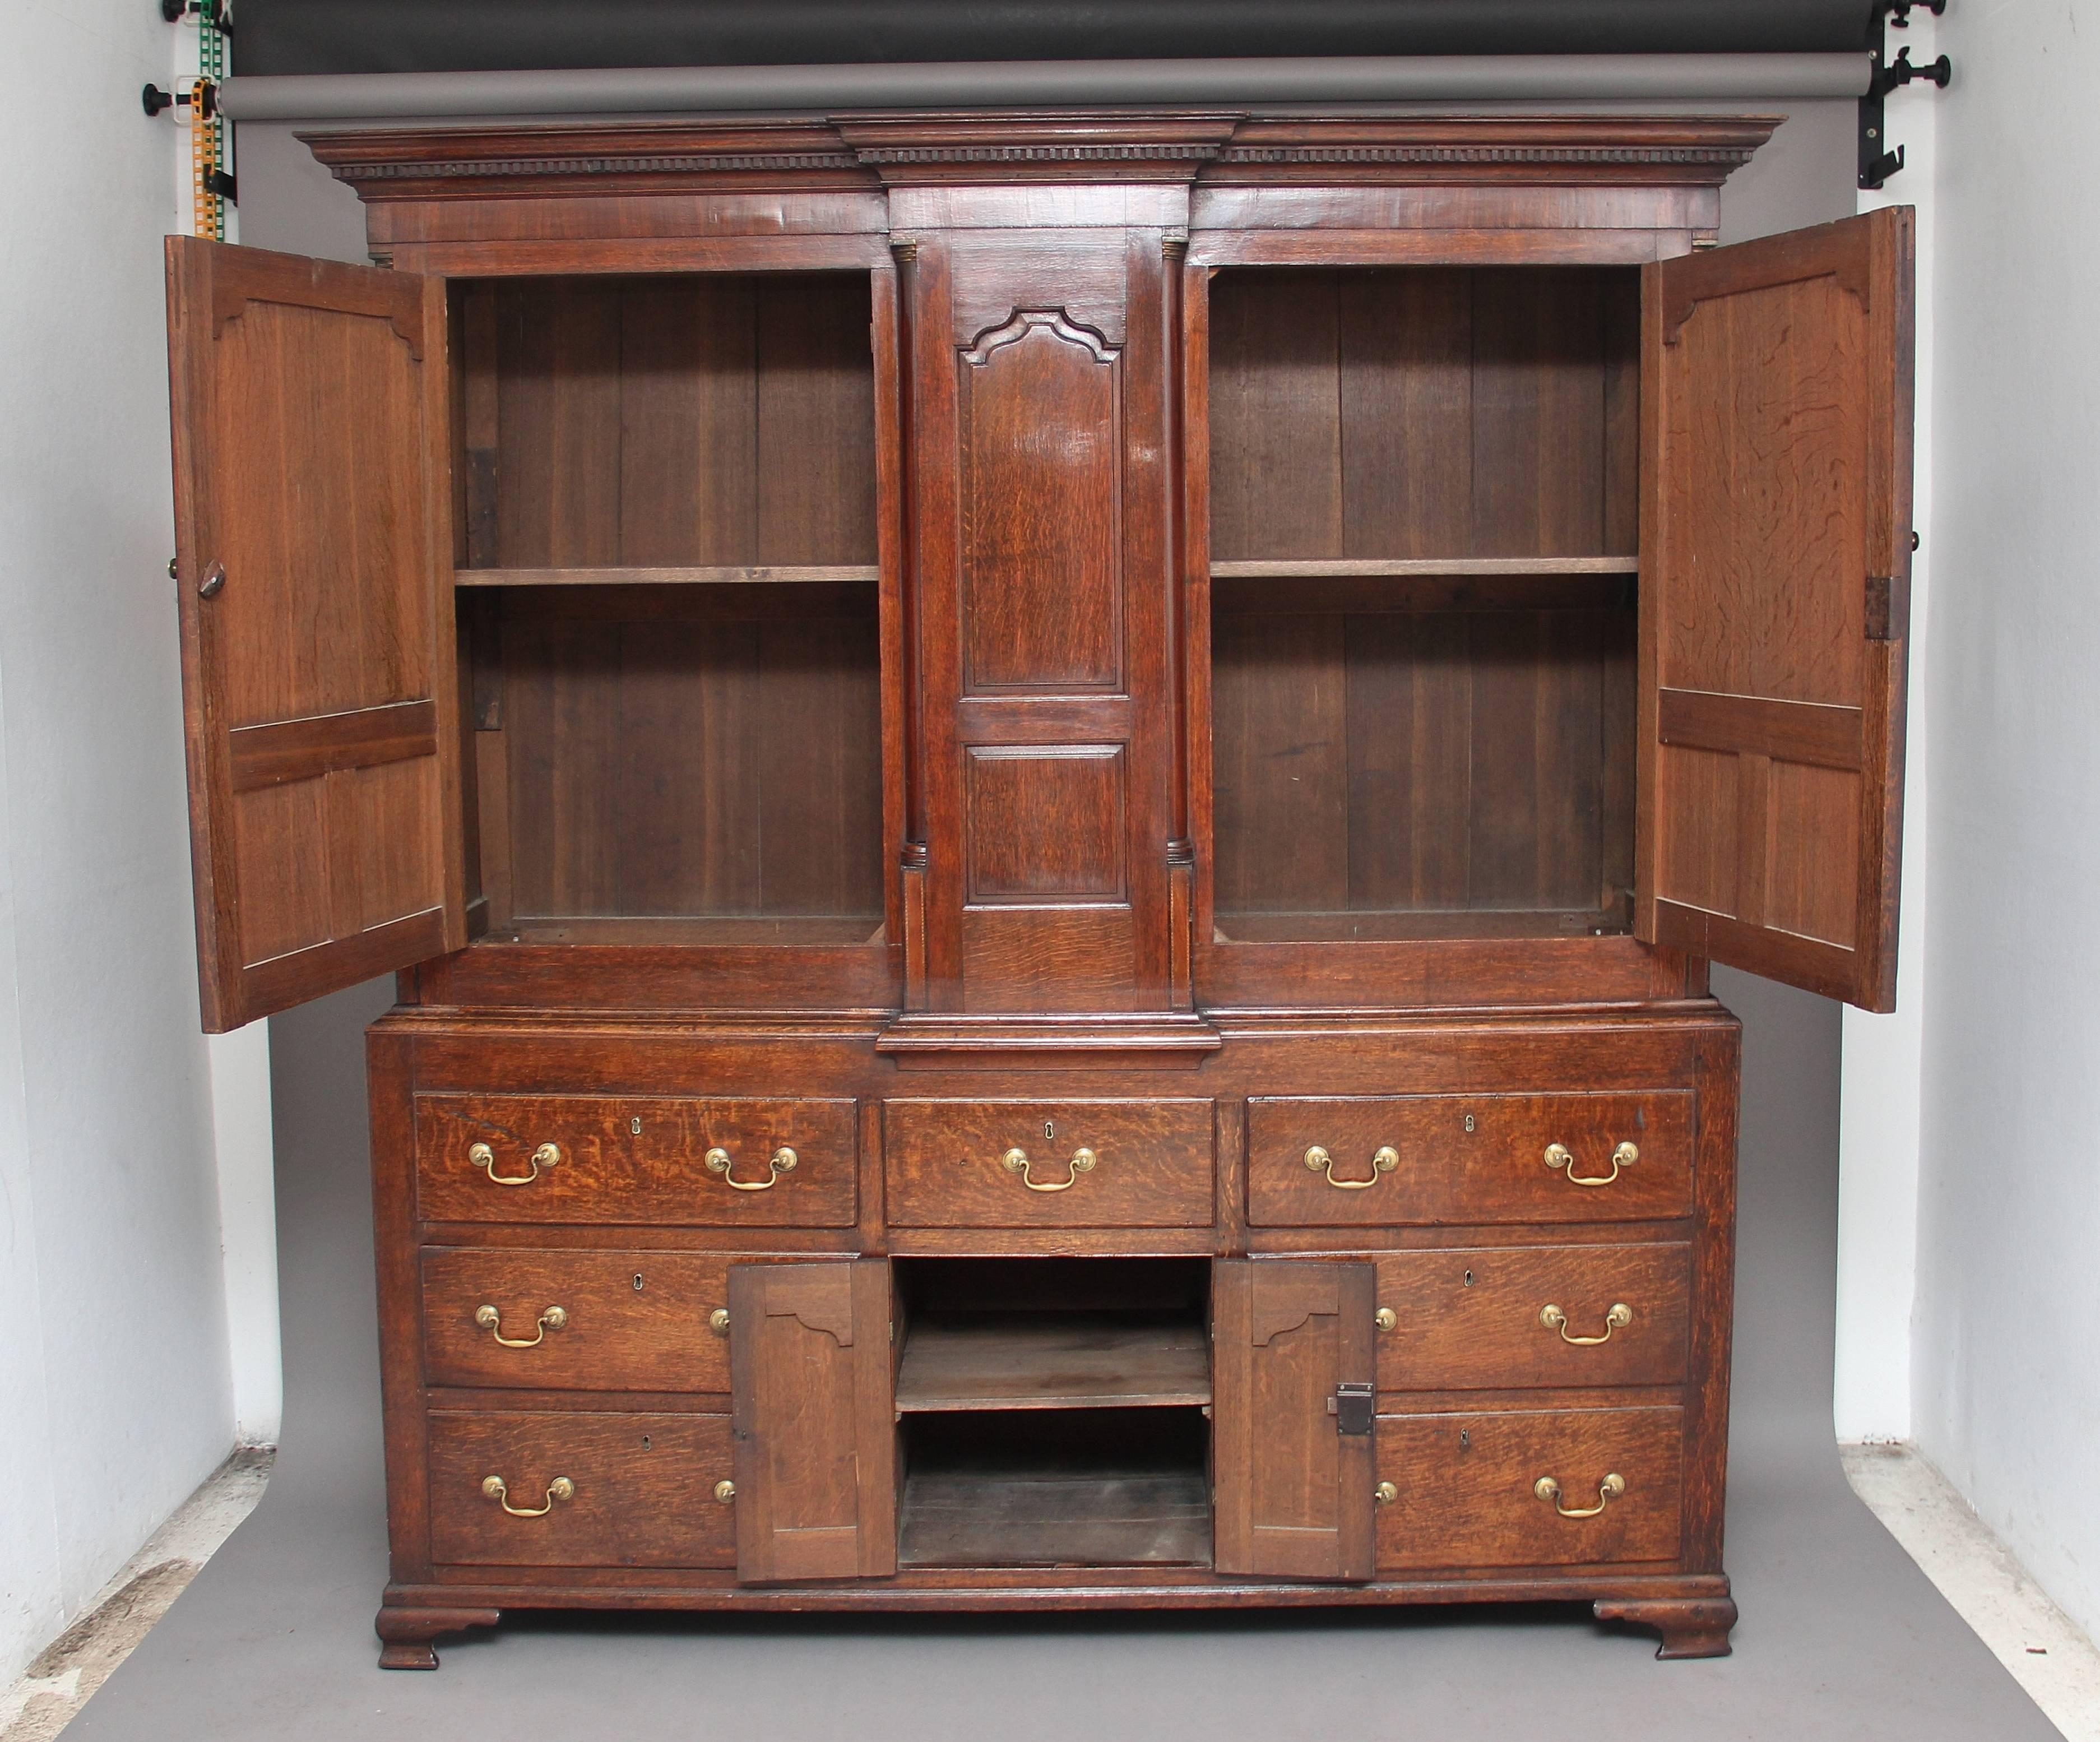 18th century oak housekeepers cupboard of wonderful proportions, the cupboard is in two sections, the top section of breakfront from with a door either side of a central panel, the doors and central panel are fielded framed by quarter columns, the